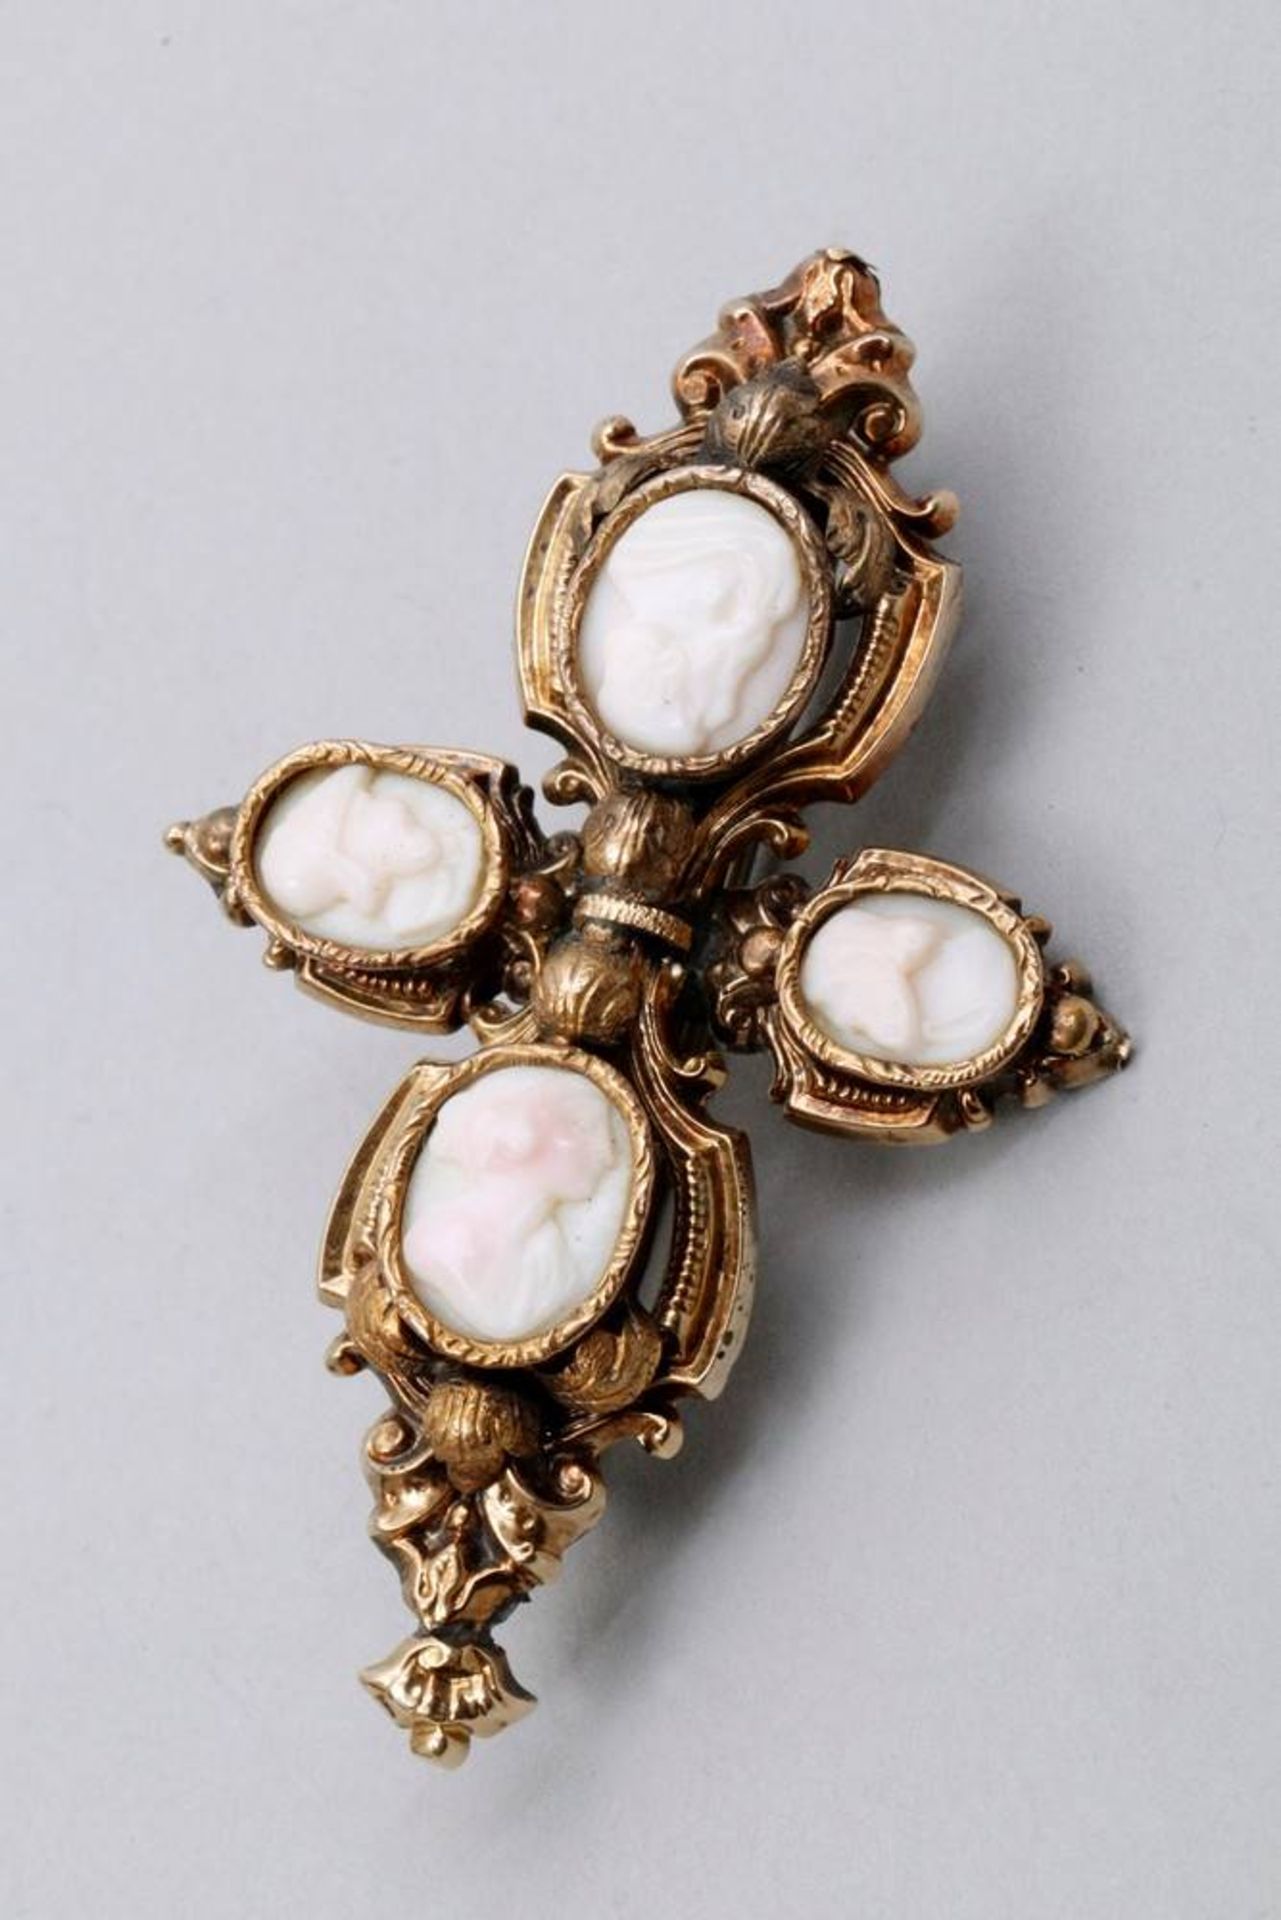 Biedermeier cross brooch 18kt gold, 4 portrait-cameos, H: ca. 5cm, signs of age and